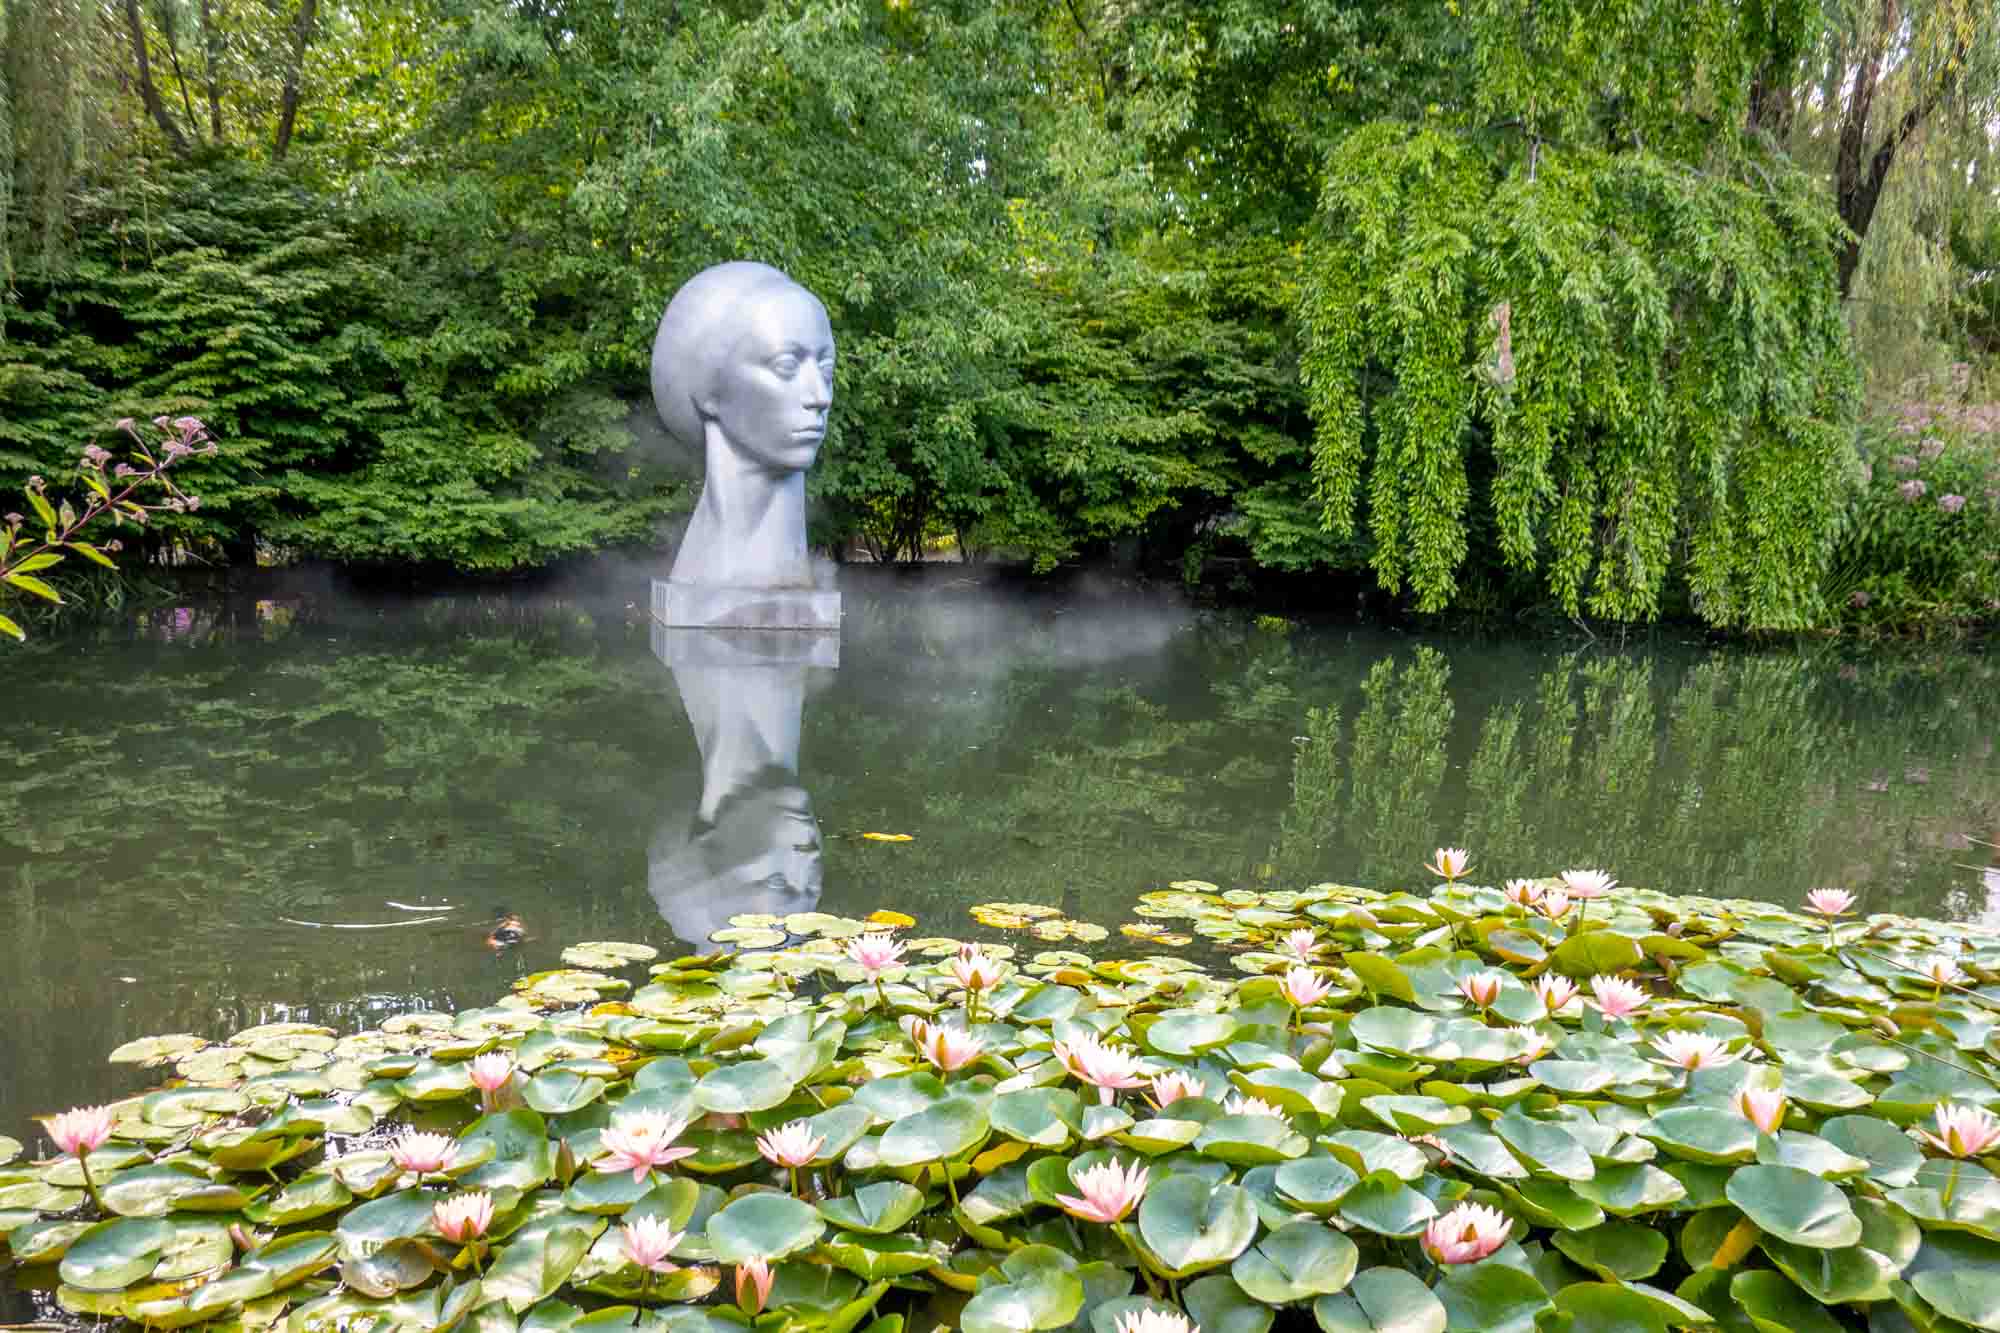 Sculpture of a woman's head in a pond with water lilies.